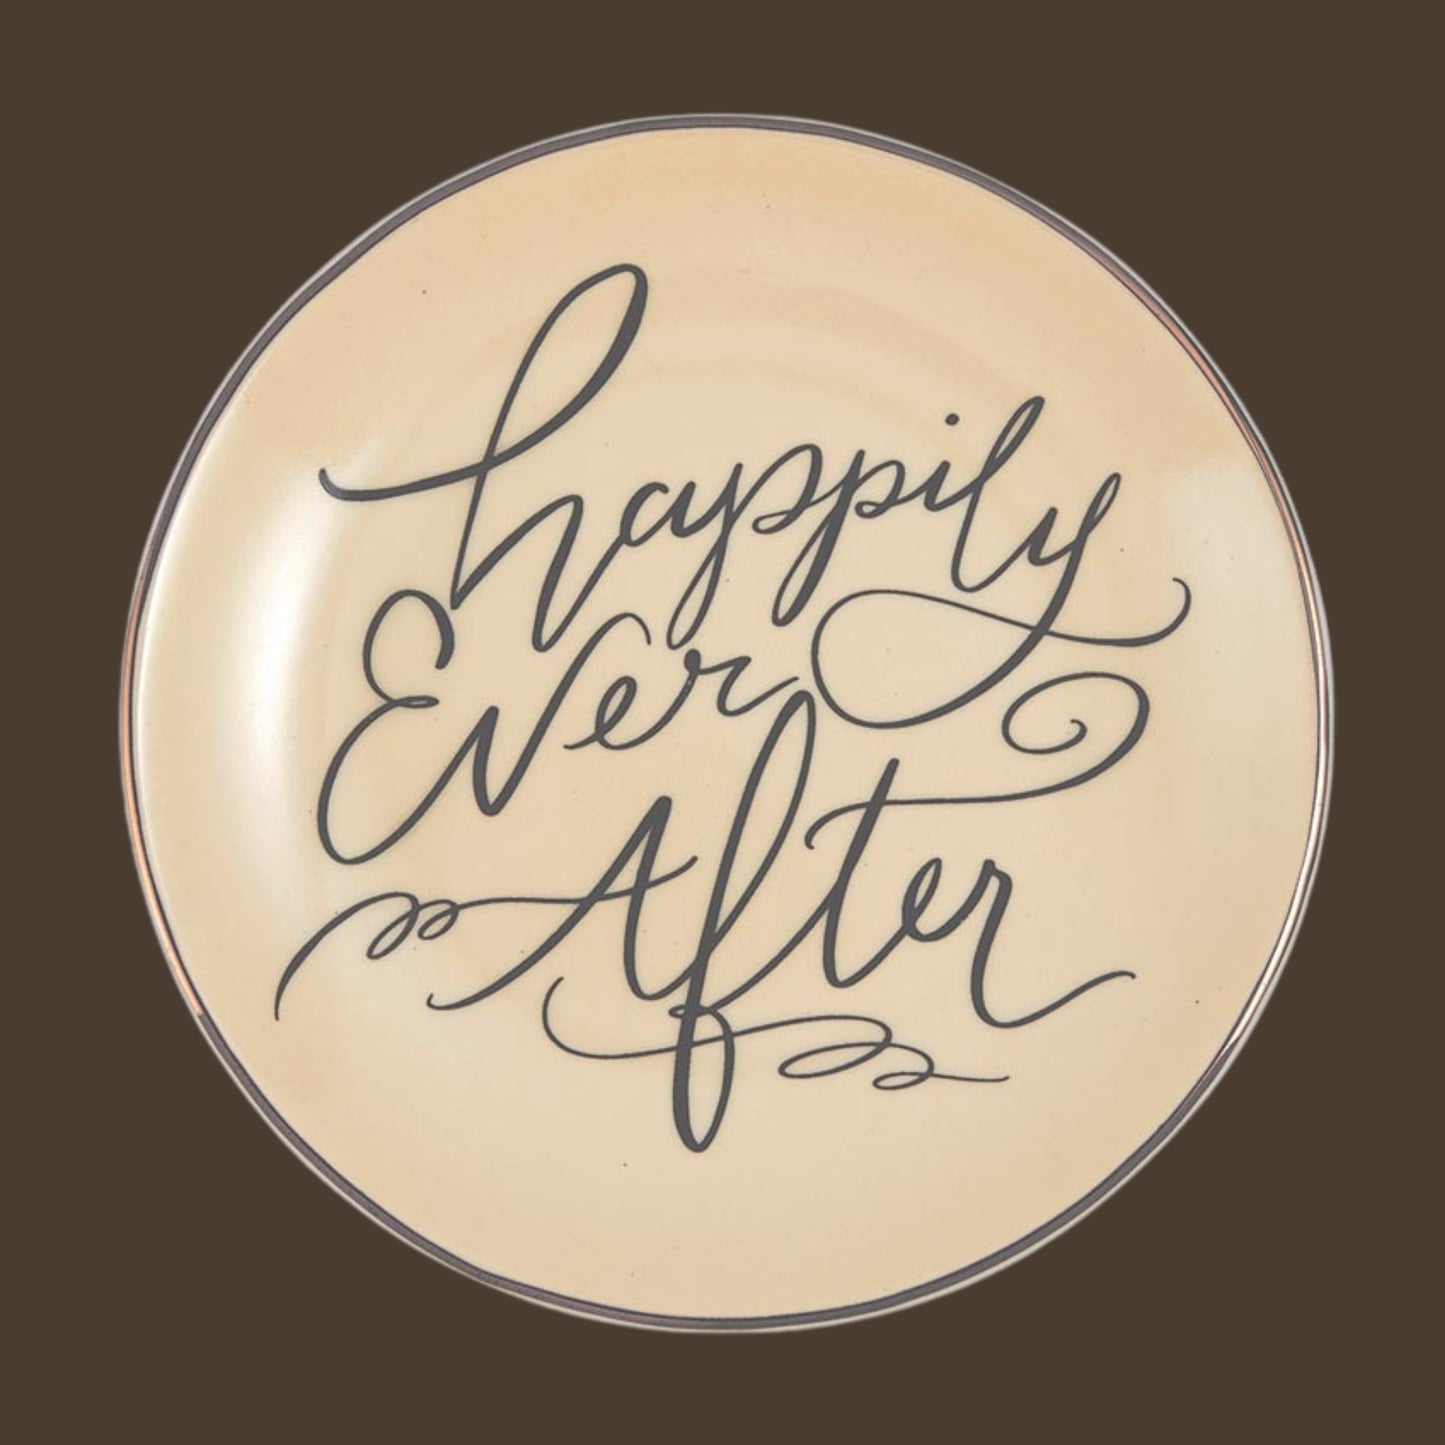 Happily Ever After Ceramic Trinket Tray - Anniversary Gift  - Wedding Gift - Jewelry Holder - Ring Dish | oak7west.com